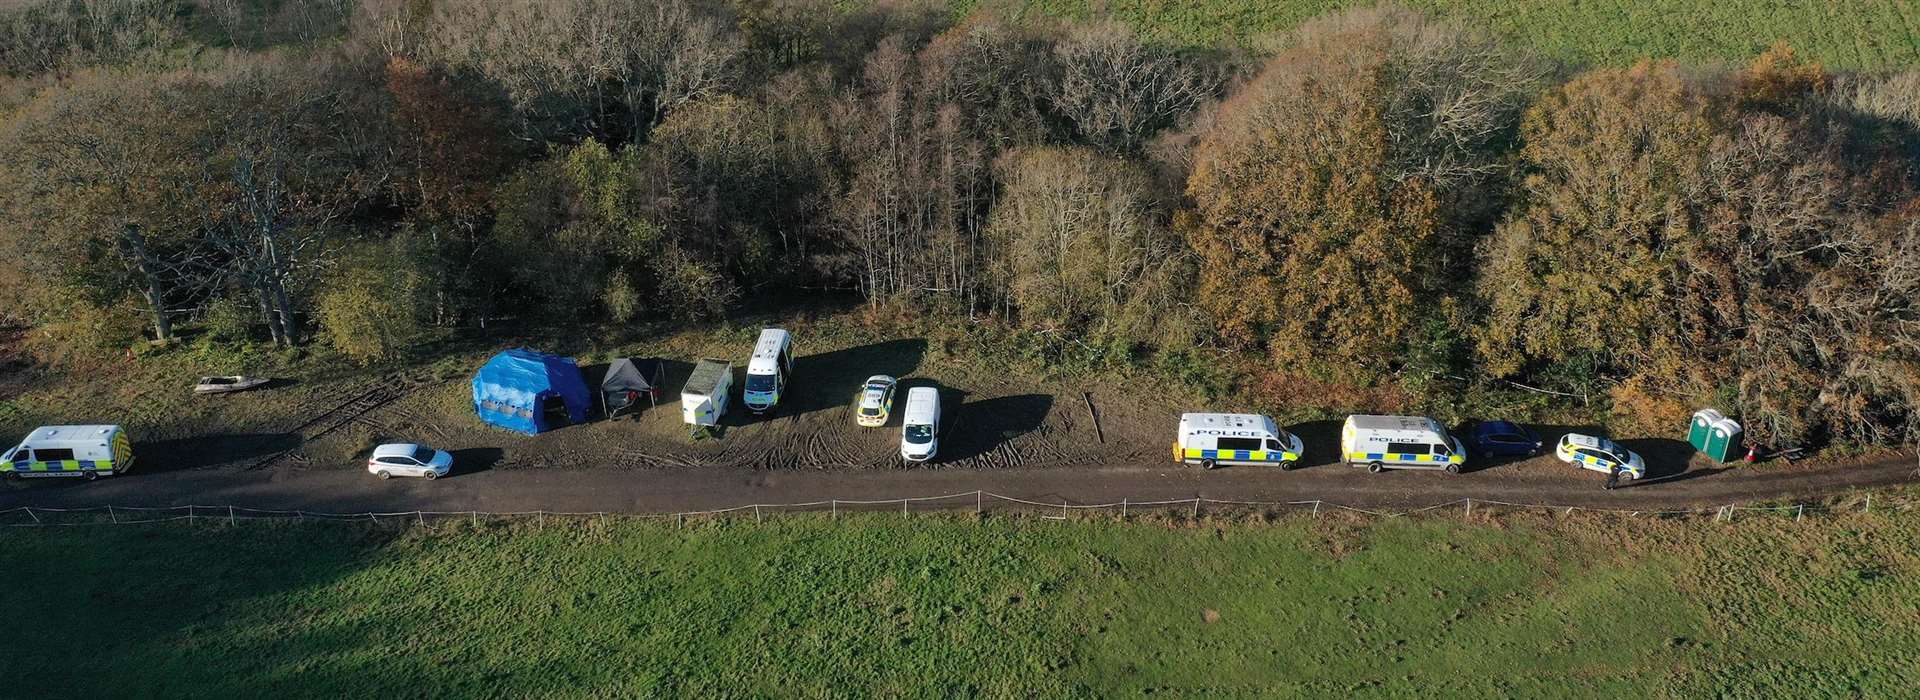 Police are continuing to search an area near a railway line in Hastings, as part of the search for Alexandra Morgan Picture: UKNIP